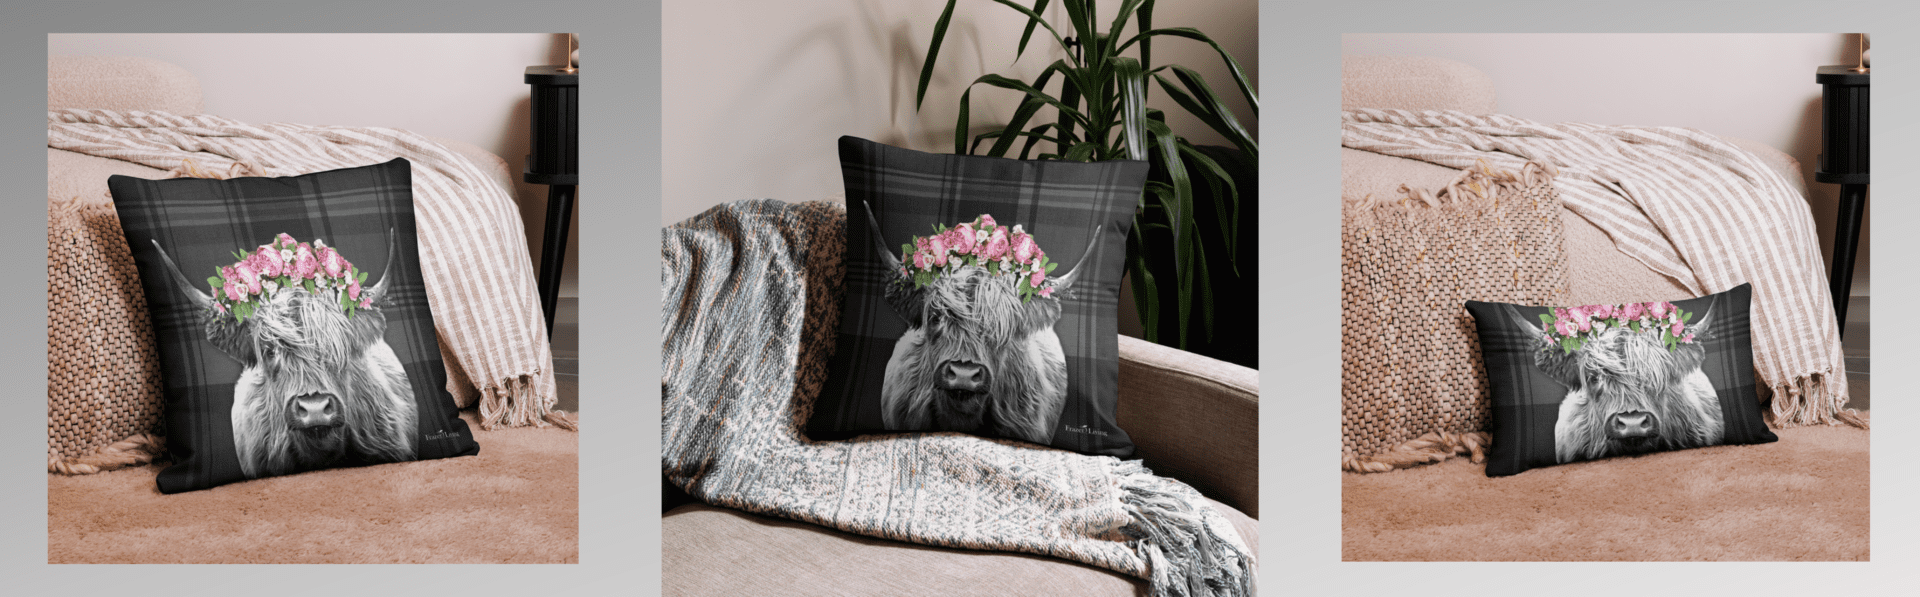 Highland cow pillow with floral crown.